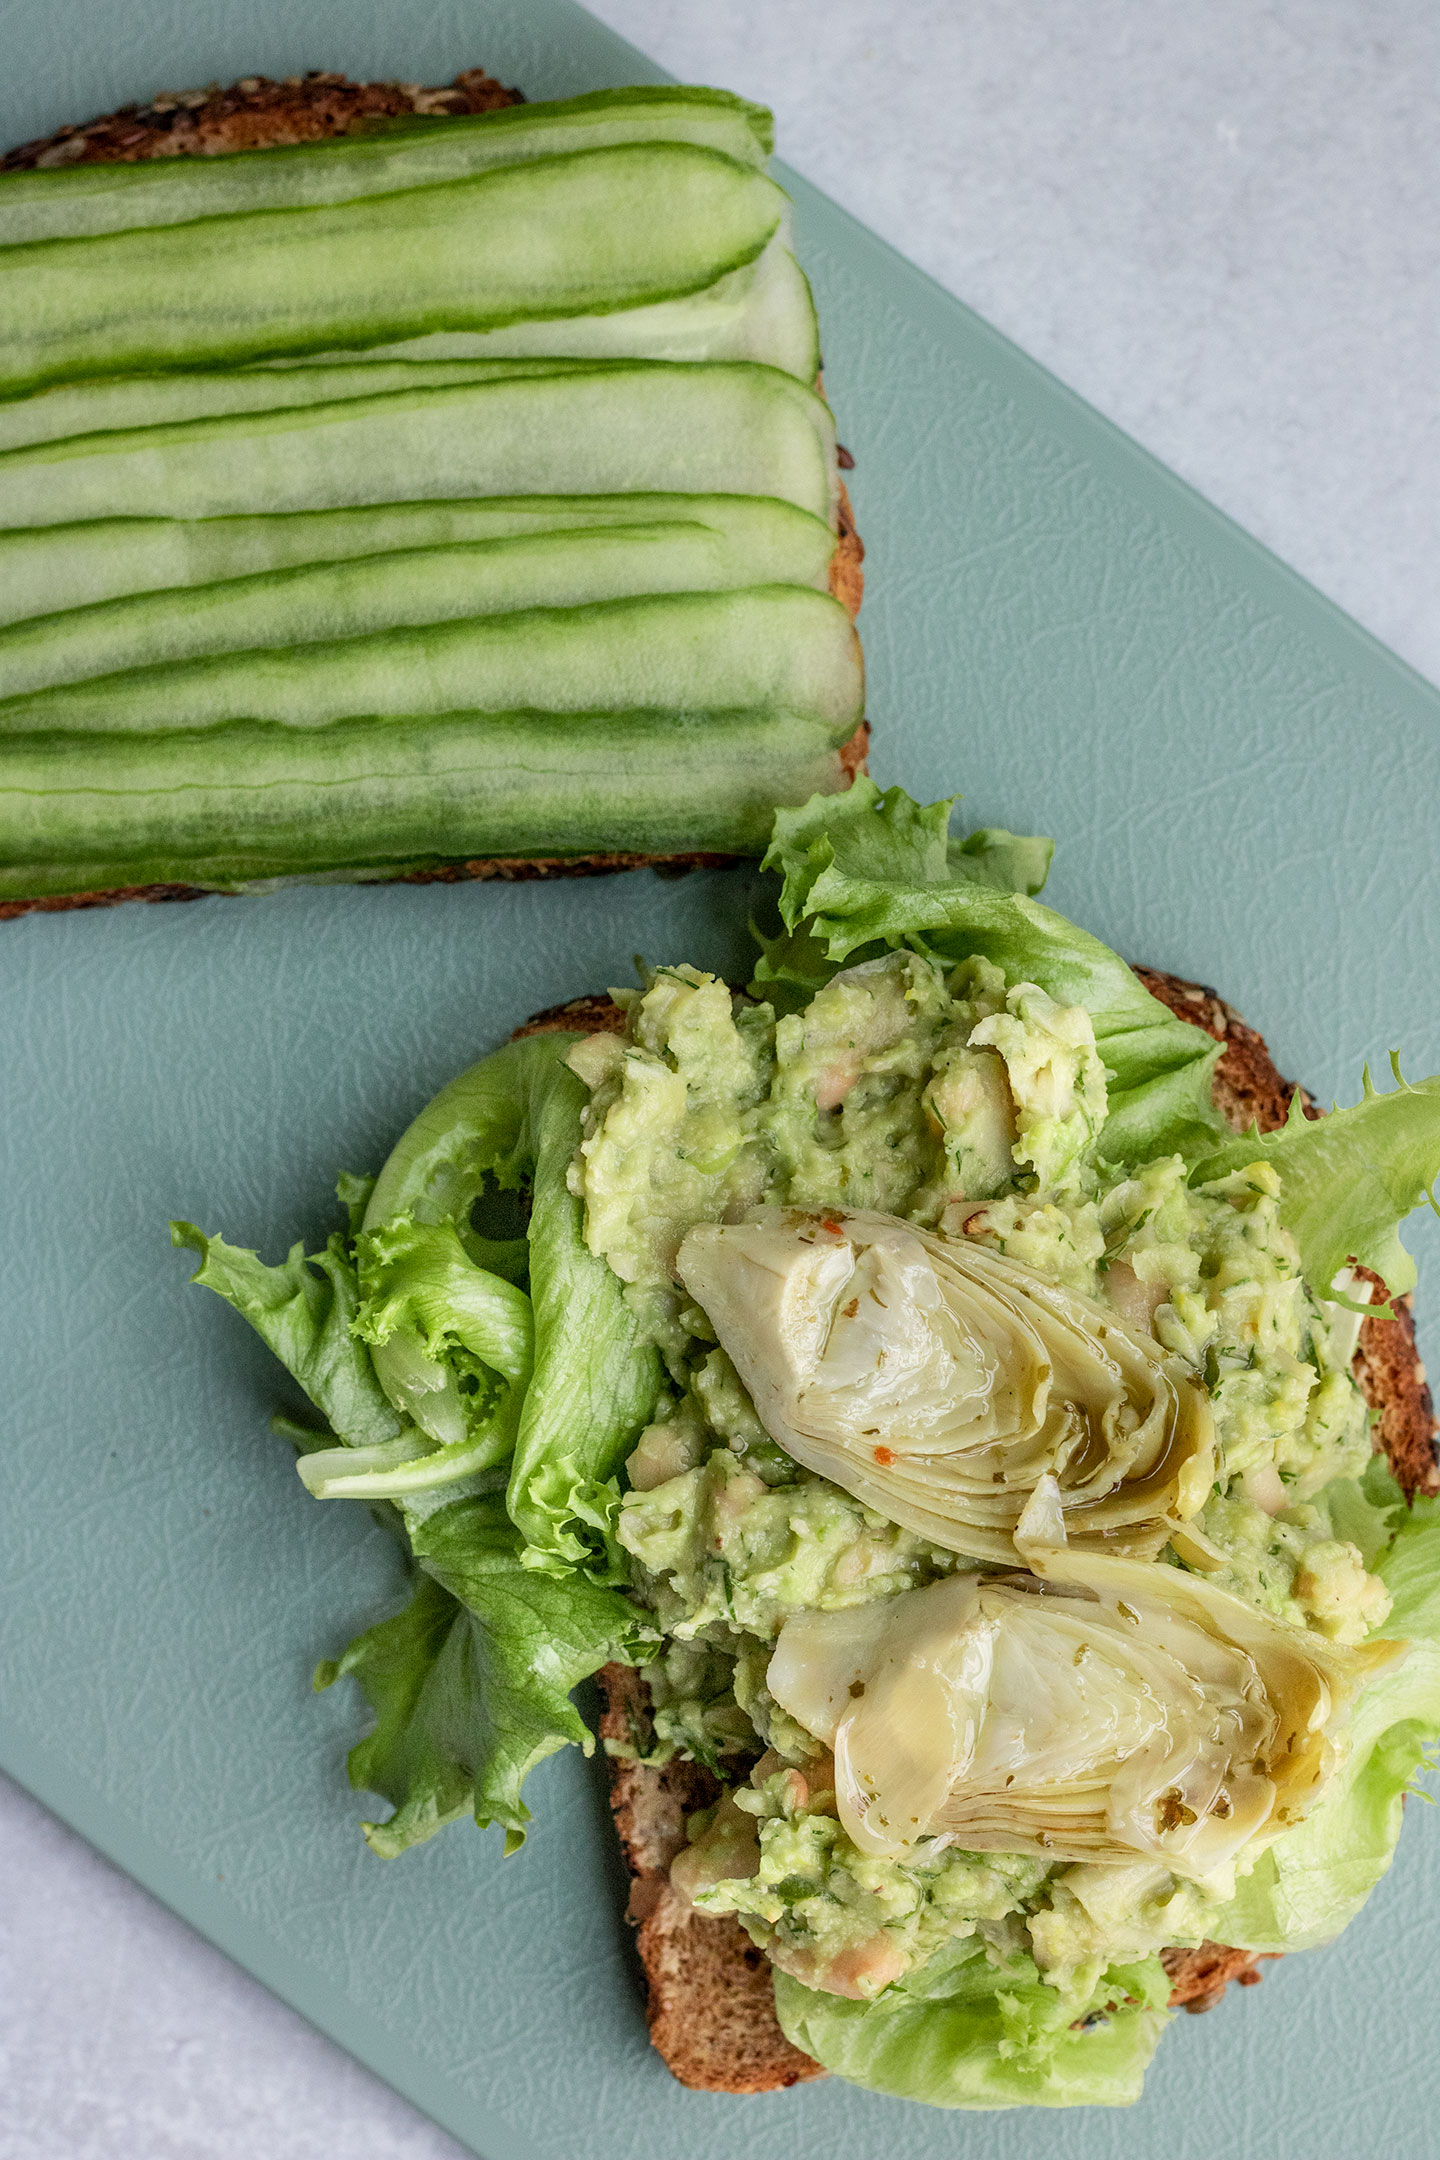 Assembling the avocado white bean spread on bread, greens, artichoke hearts and cucumber.